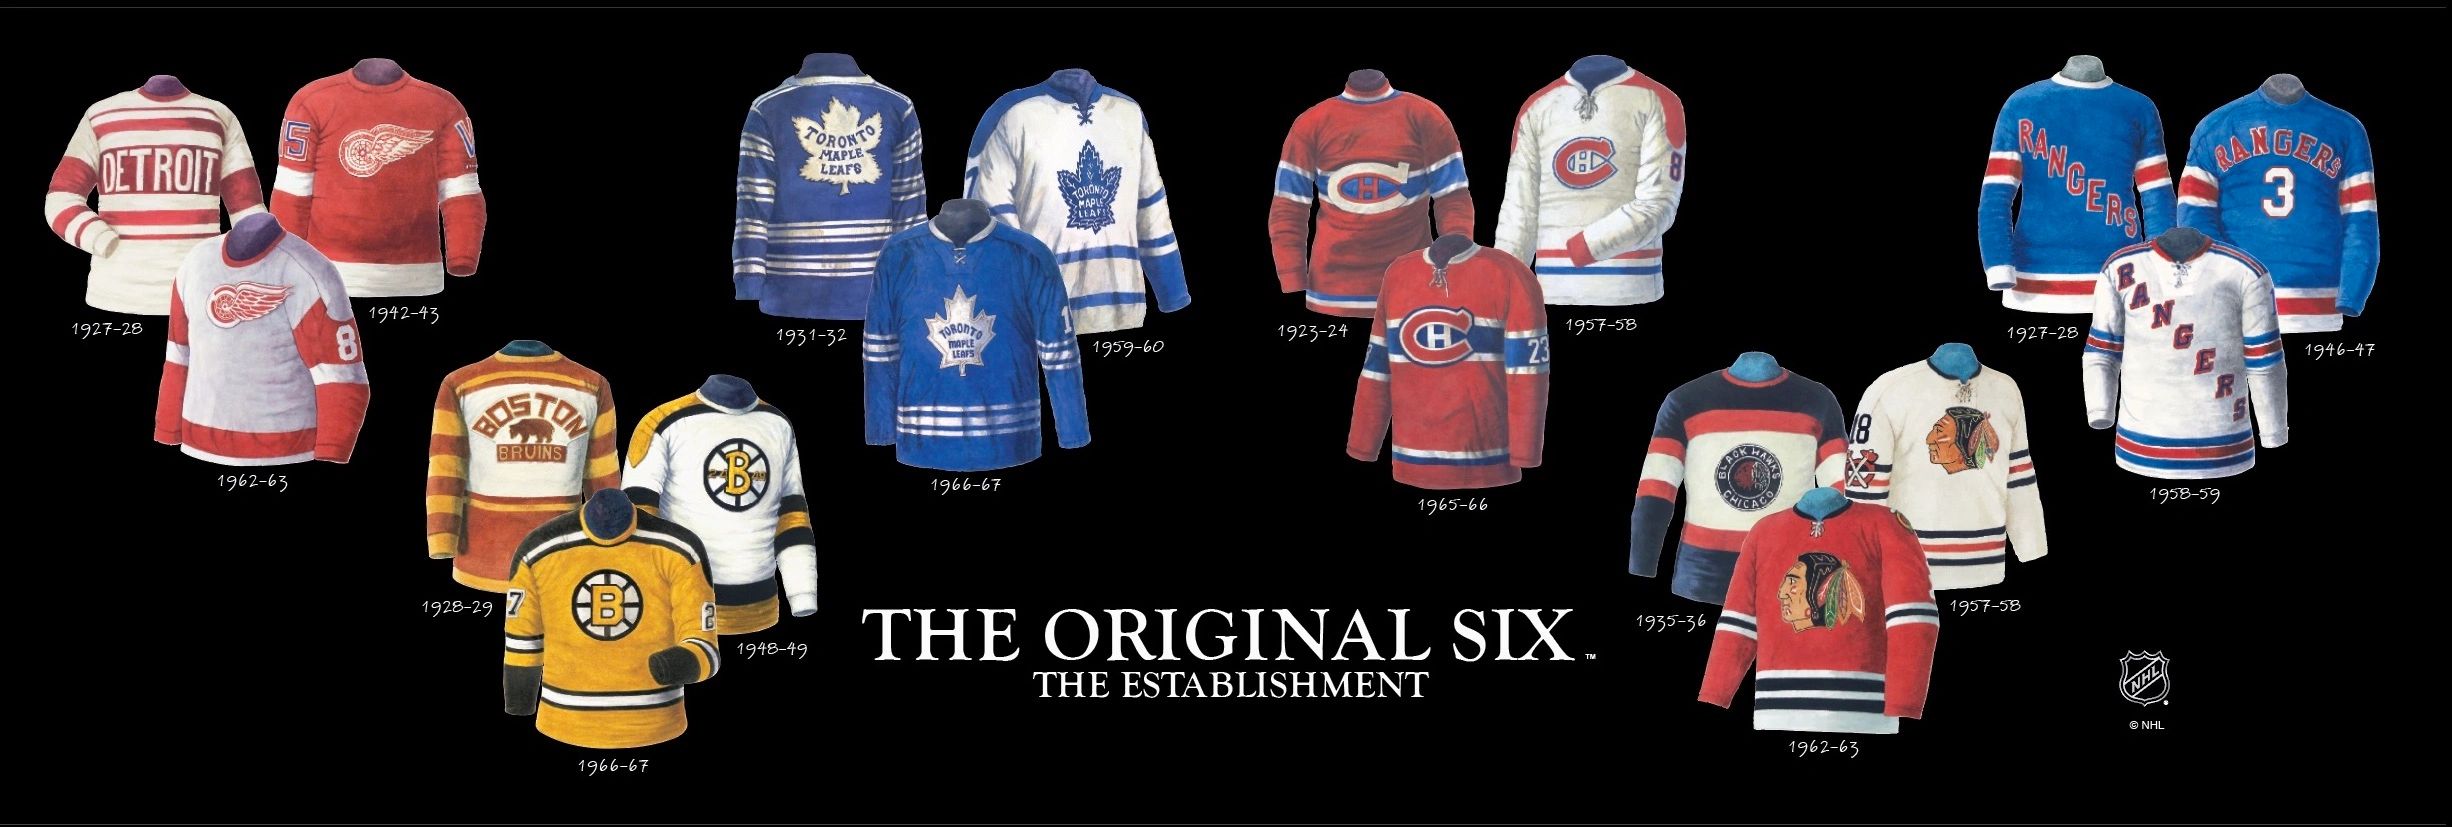 This "Original Six Jerseys" poster is one of the best selling posters in Canadian history.